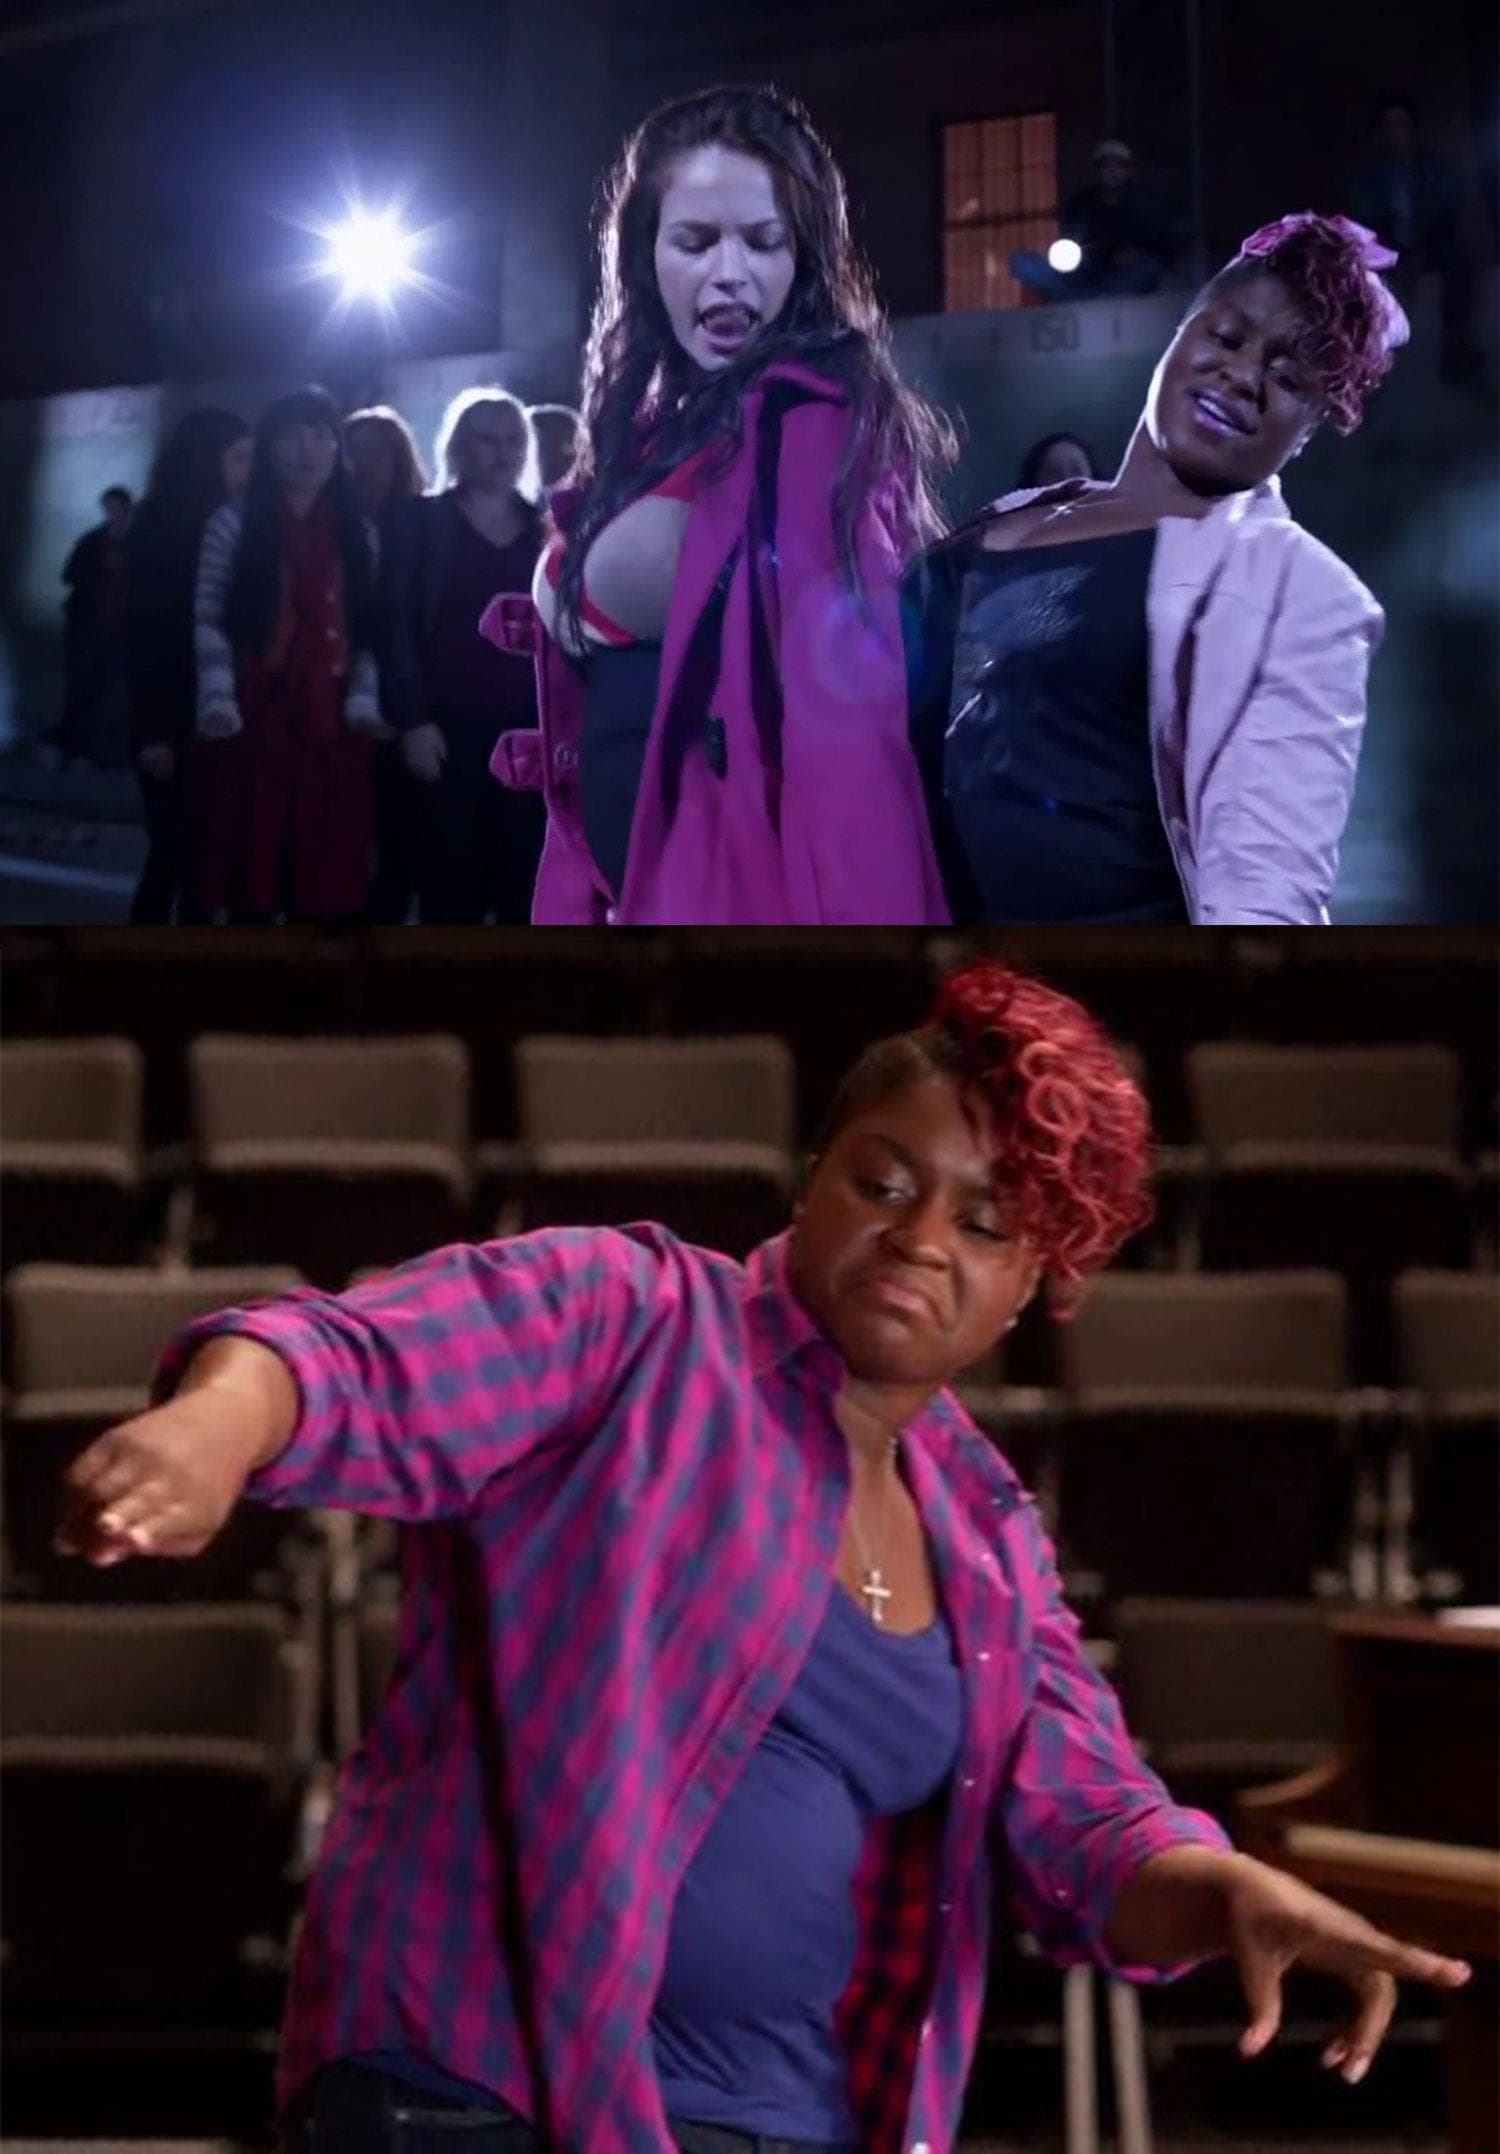 Random Interesting Details From The 'Pitch Perfect' Series That Make It Worthy Of A Rewatch